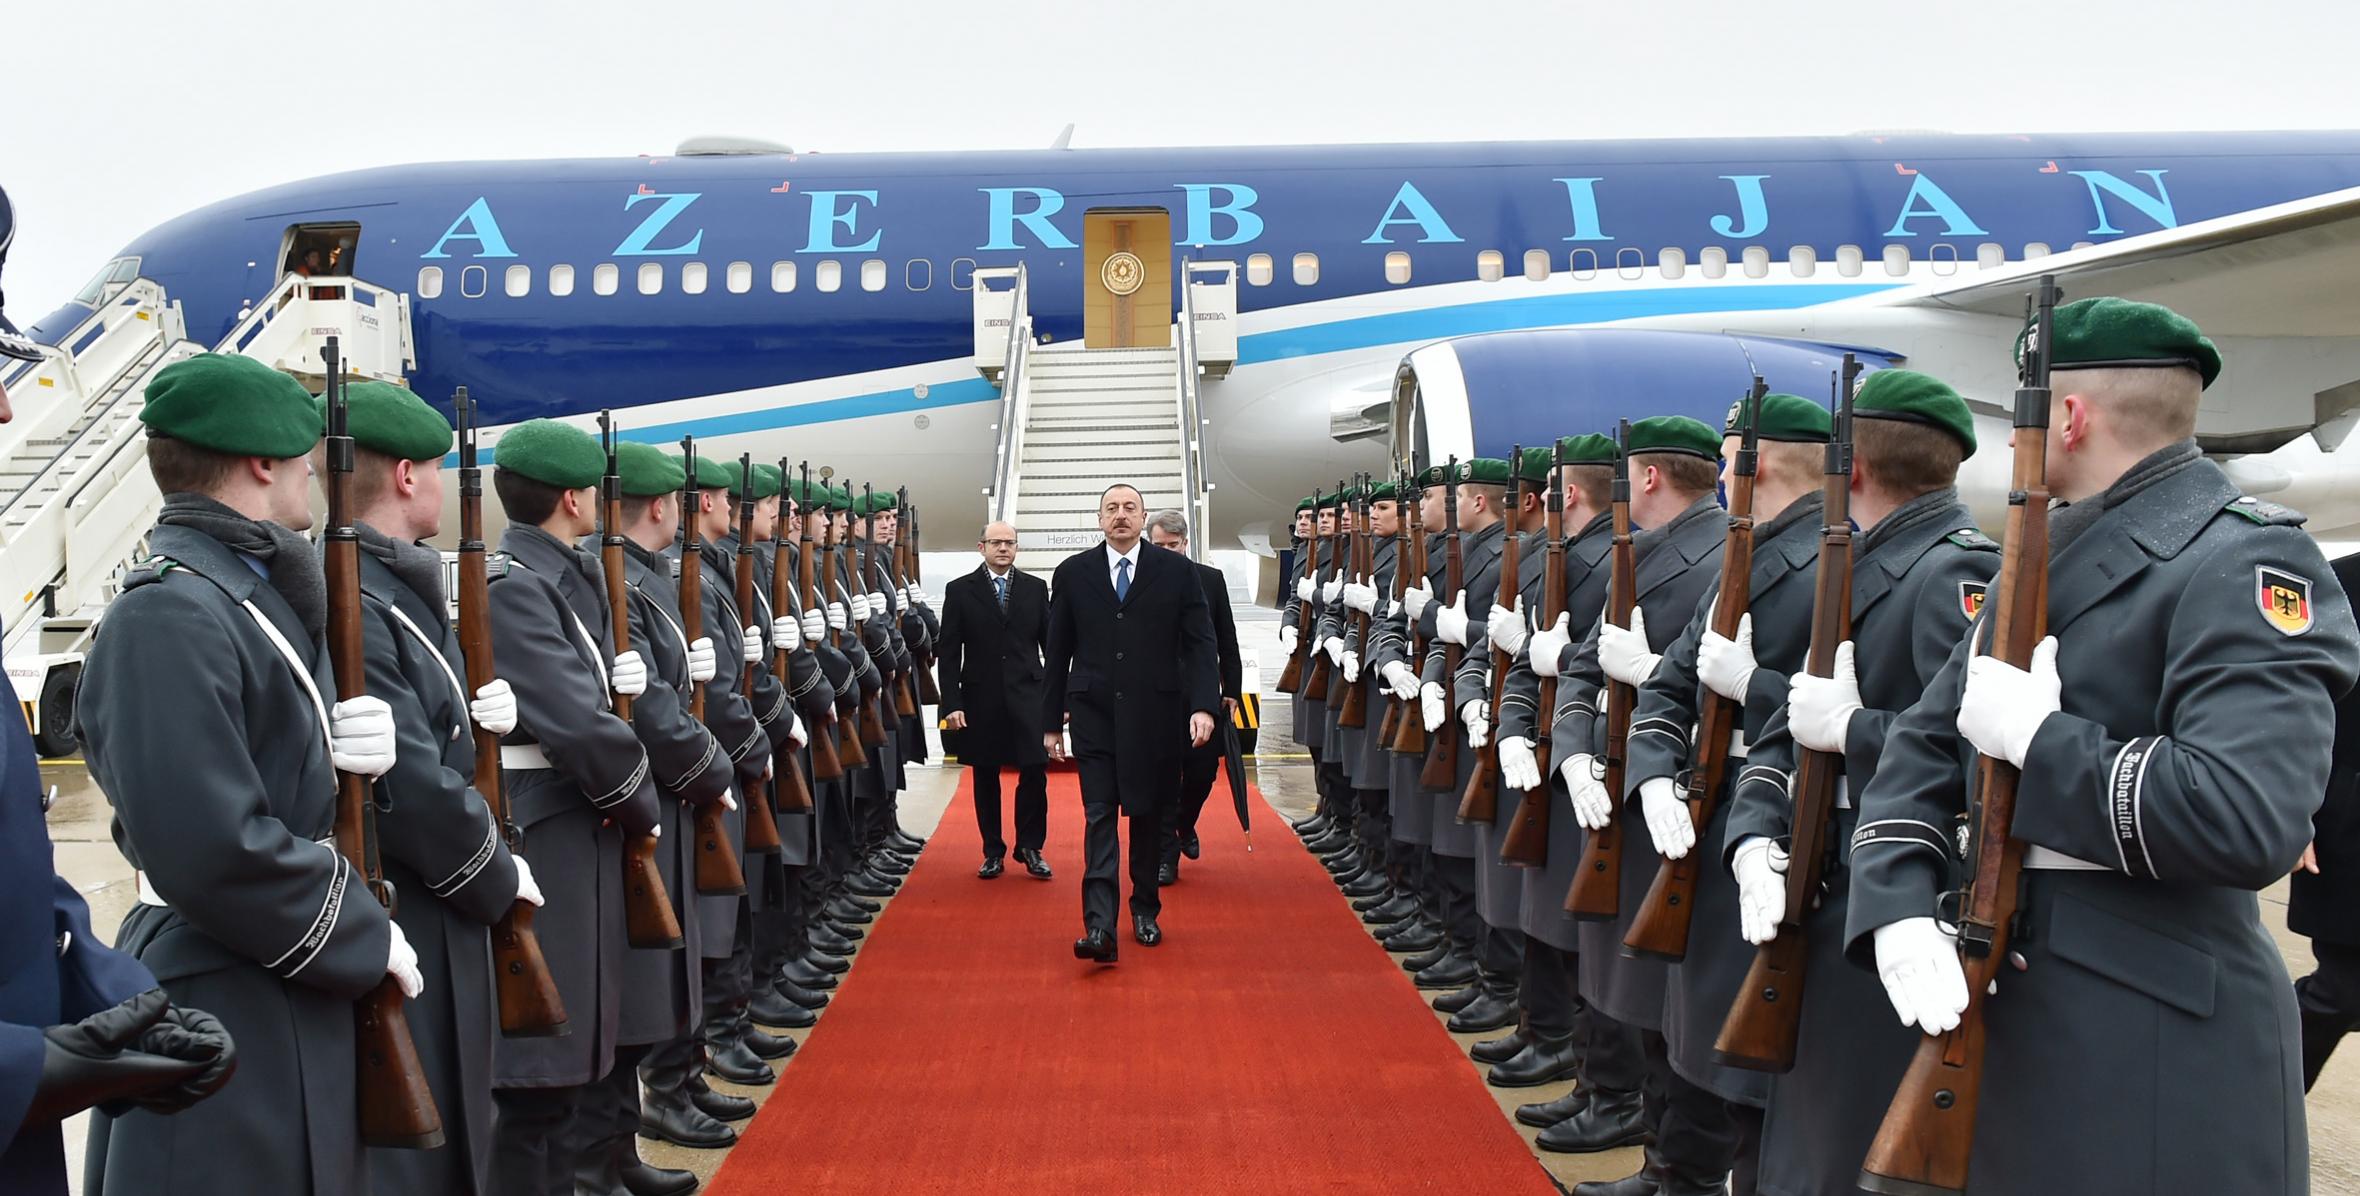 Ilham Aliyev arrived in Germany on a working visit